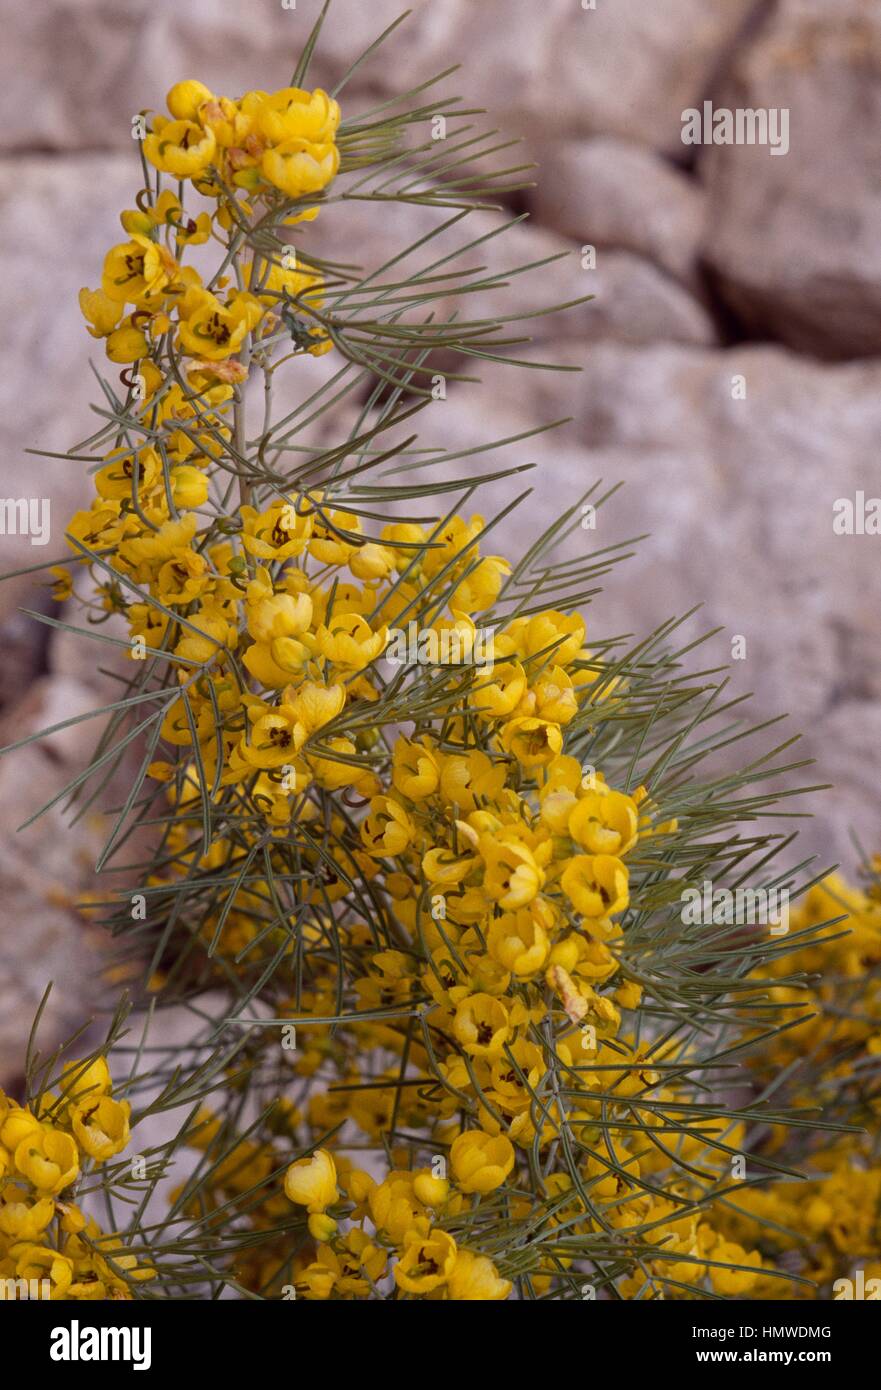 Silver Cassia flowering branches (Senna artemisioides), Fabaceae-Leguminosae. Stock Photo